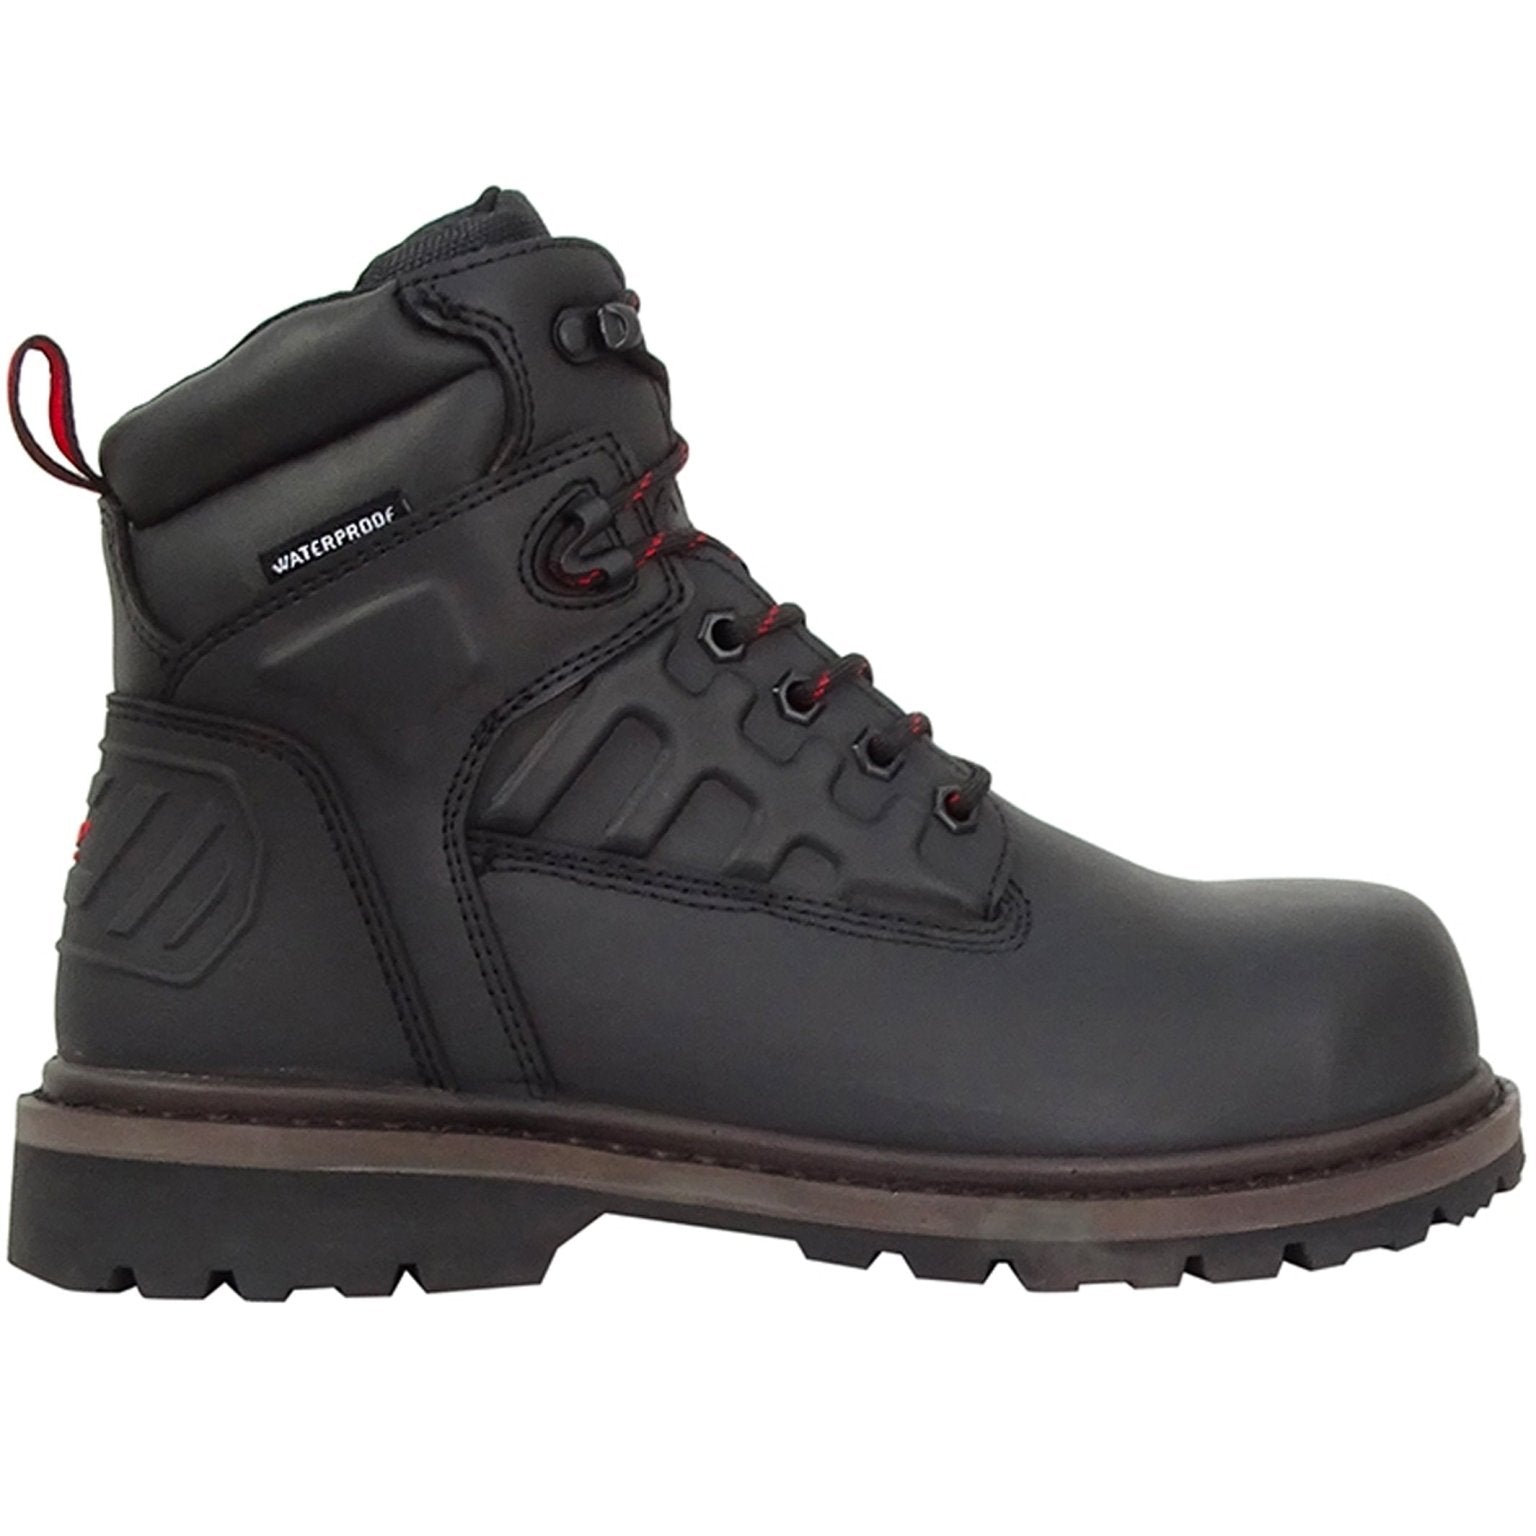 4elementsclothingHoggs of FifeHoggs of Fife - Hercules Safety Lace up Boots - Steel Toe Cap bootsSafety FootwearHERC/BK/40